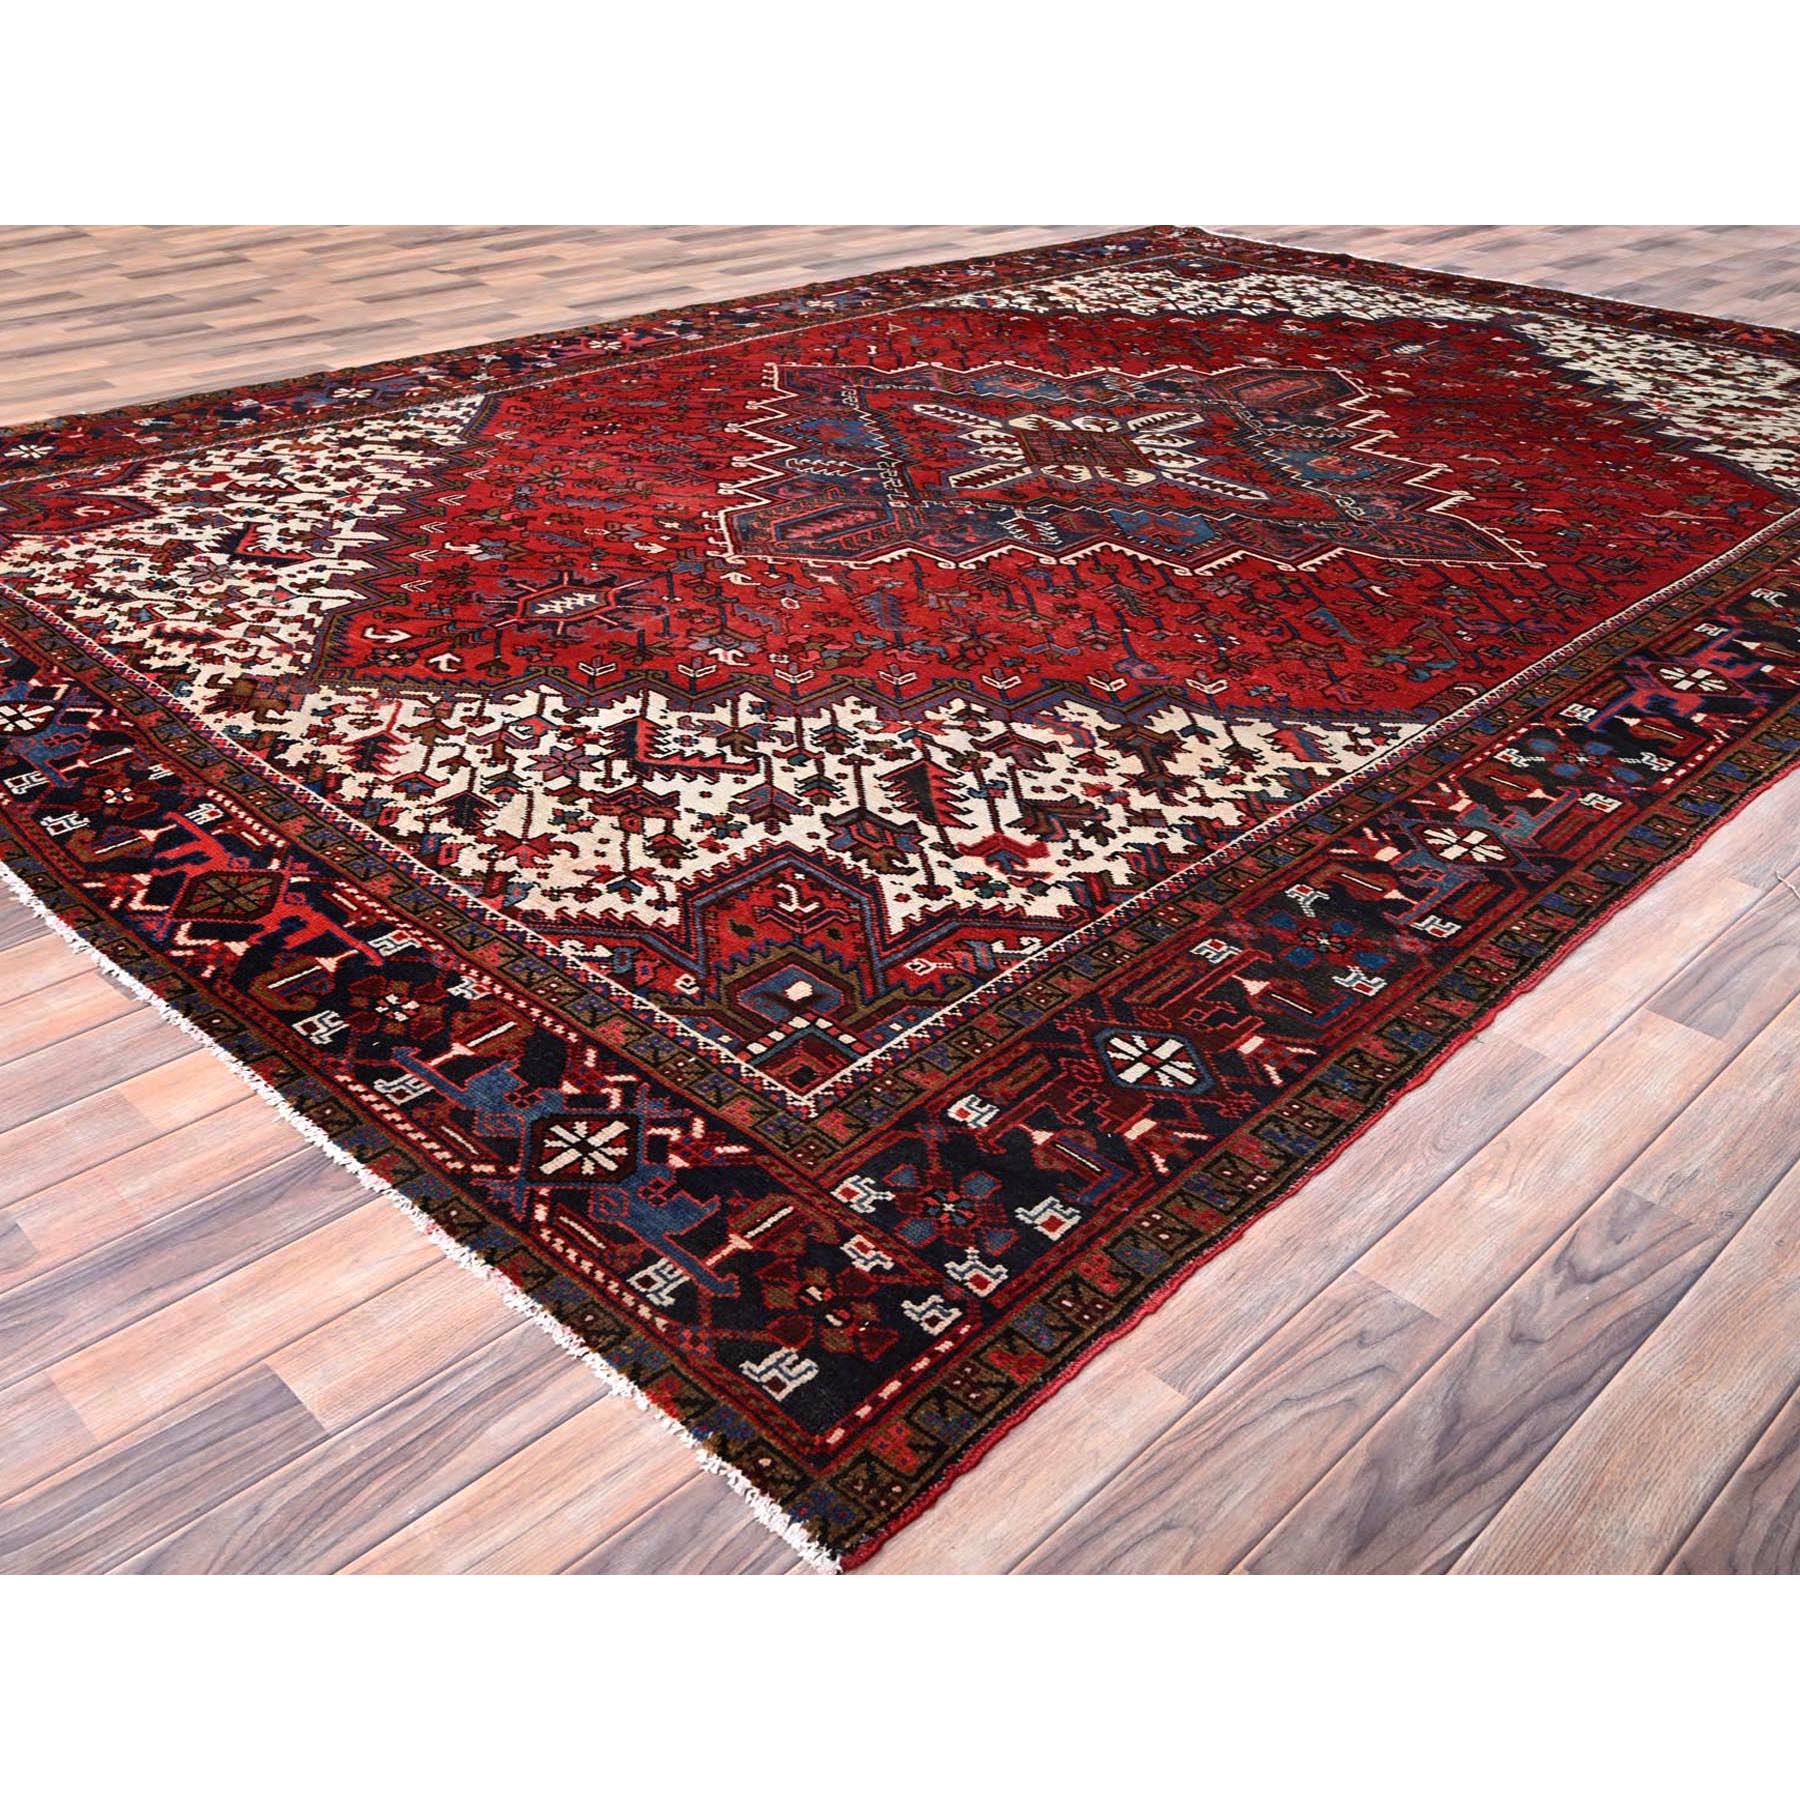 9'9"x13'3" Imperial Red, Semi Antique Persian Heriz, Good Condition, Distressed Look, Pure Wool, Hand Woven, Oriental Rug 